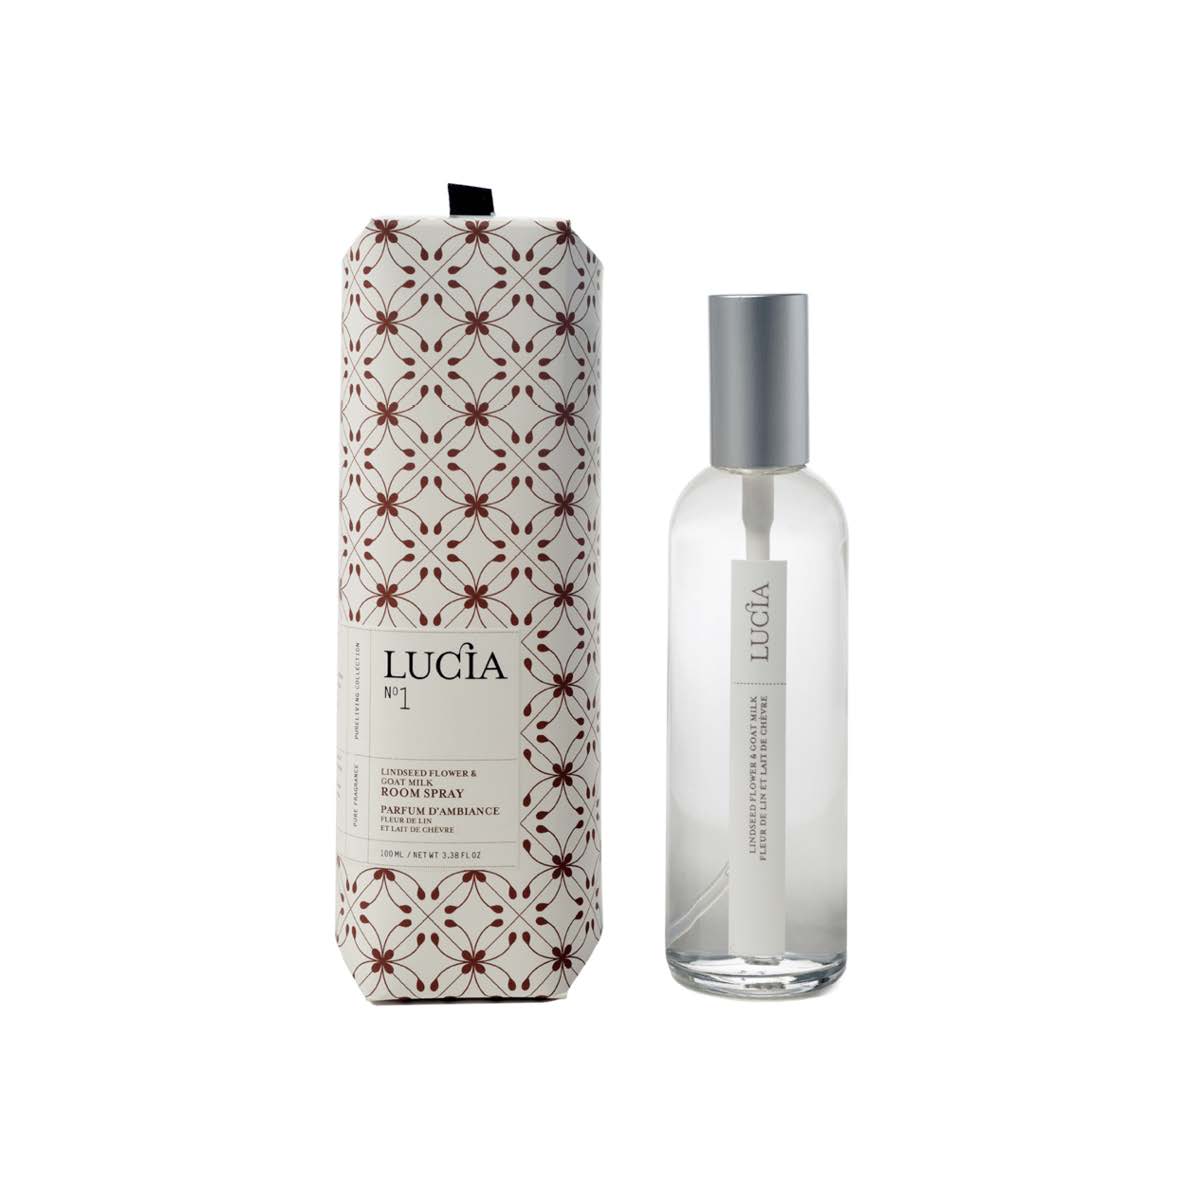 Lucia Room Spray No. 1 Linseed Flower and Goat Milk